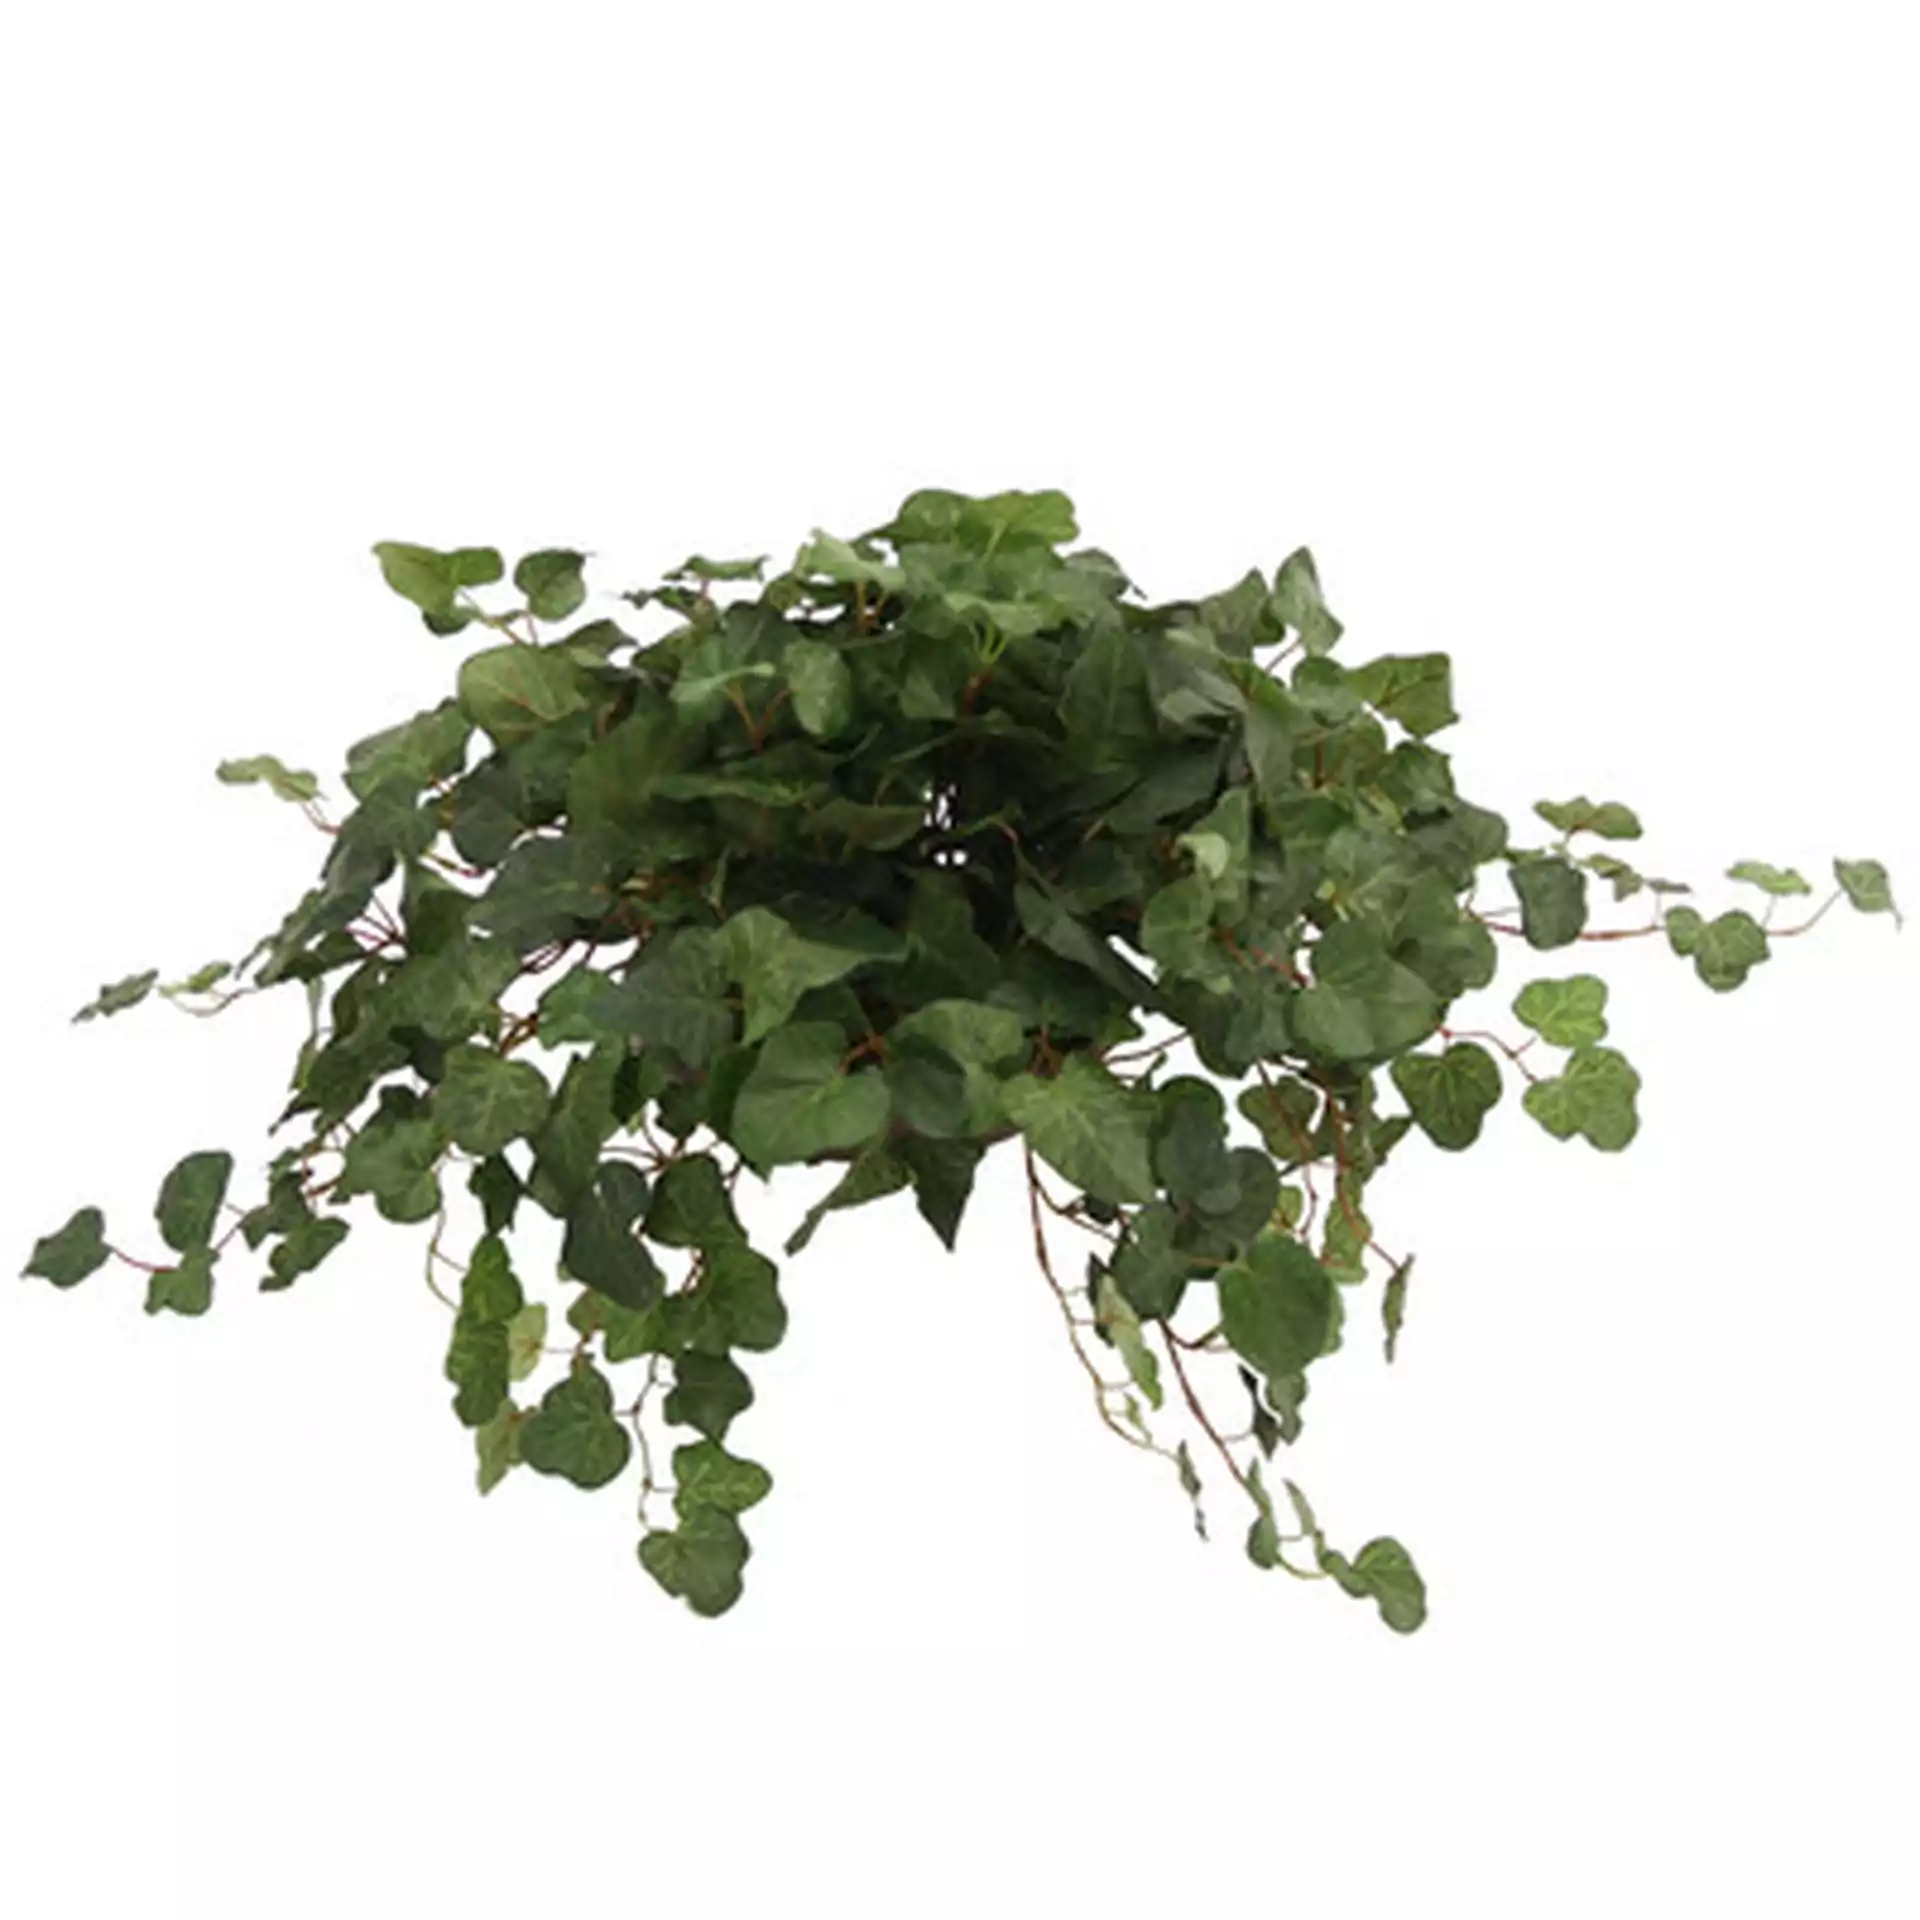 Topper with Silk Swedish Ivy Hanging Plant in Planter (Set of 2)